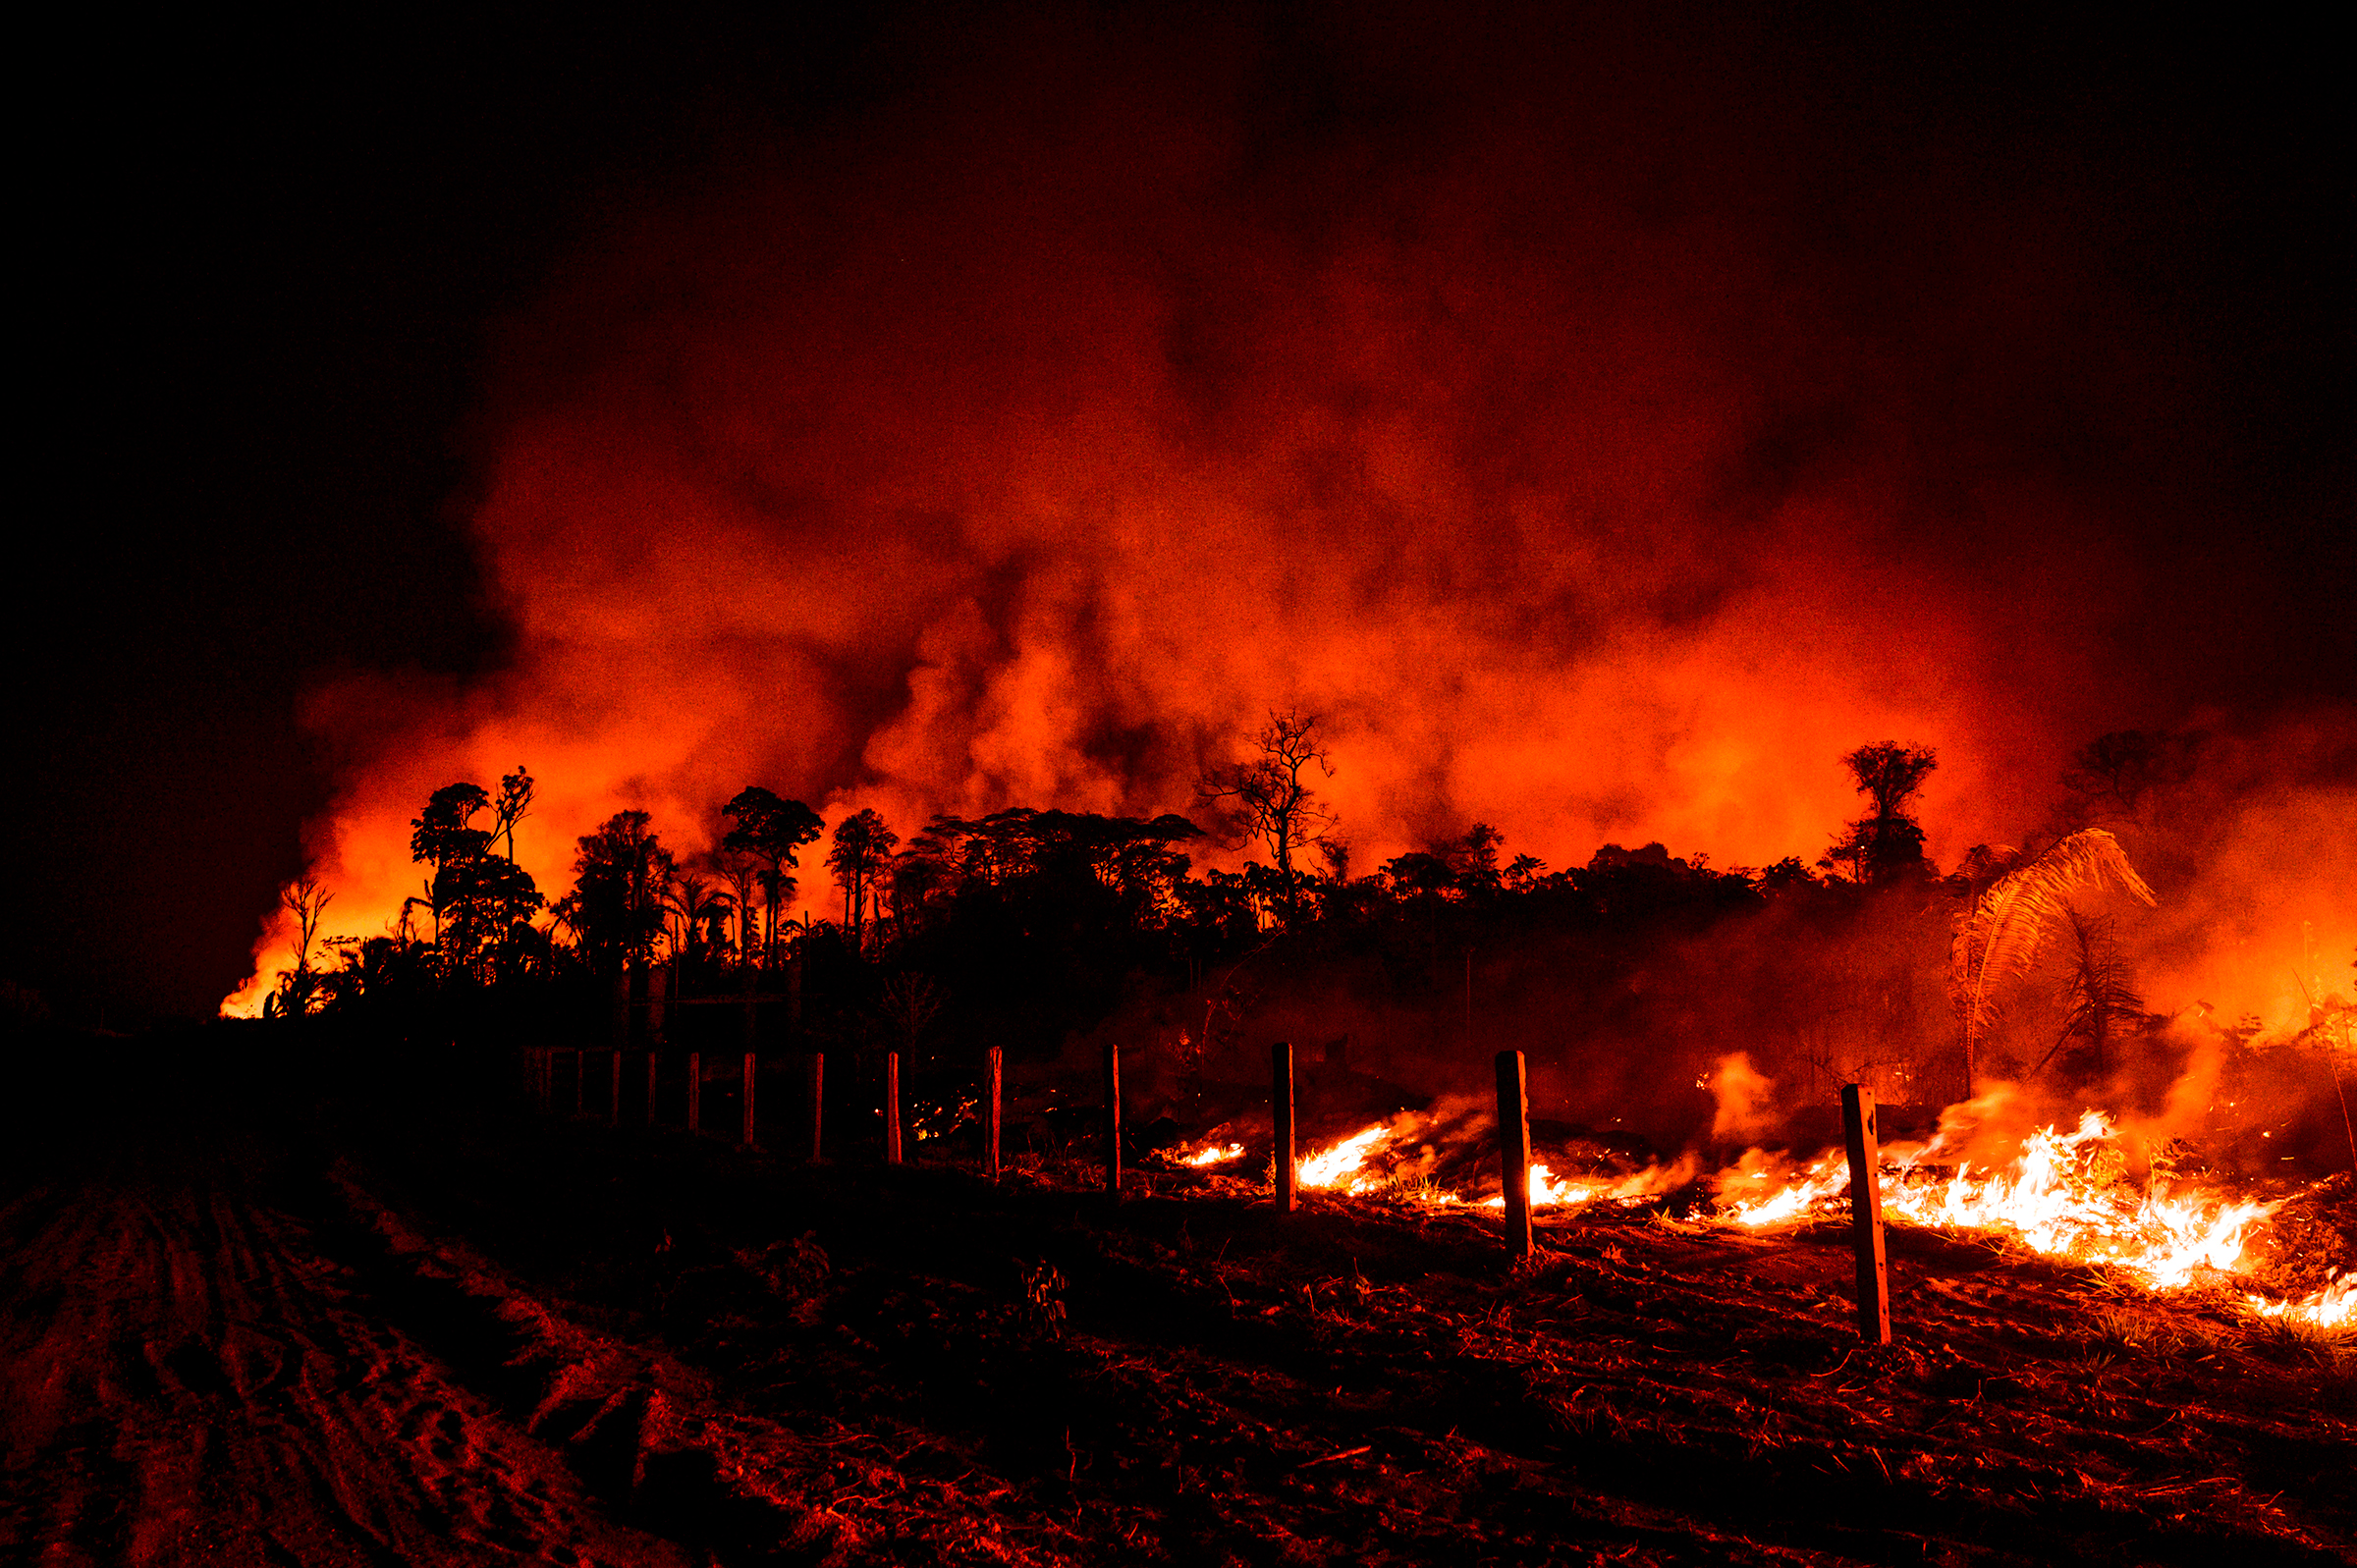 Fence posts are illuminated by nearby flames in the region of Vila Nova Samuel, near Brazil's Jacundá National Forest, on Aug. 27. (Sebastián Liste—NOOR for TIME)